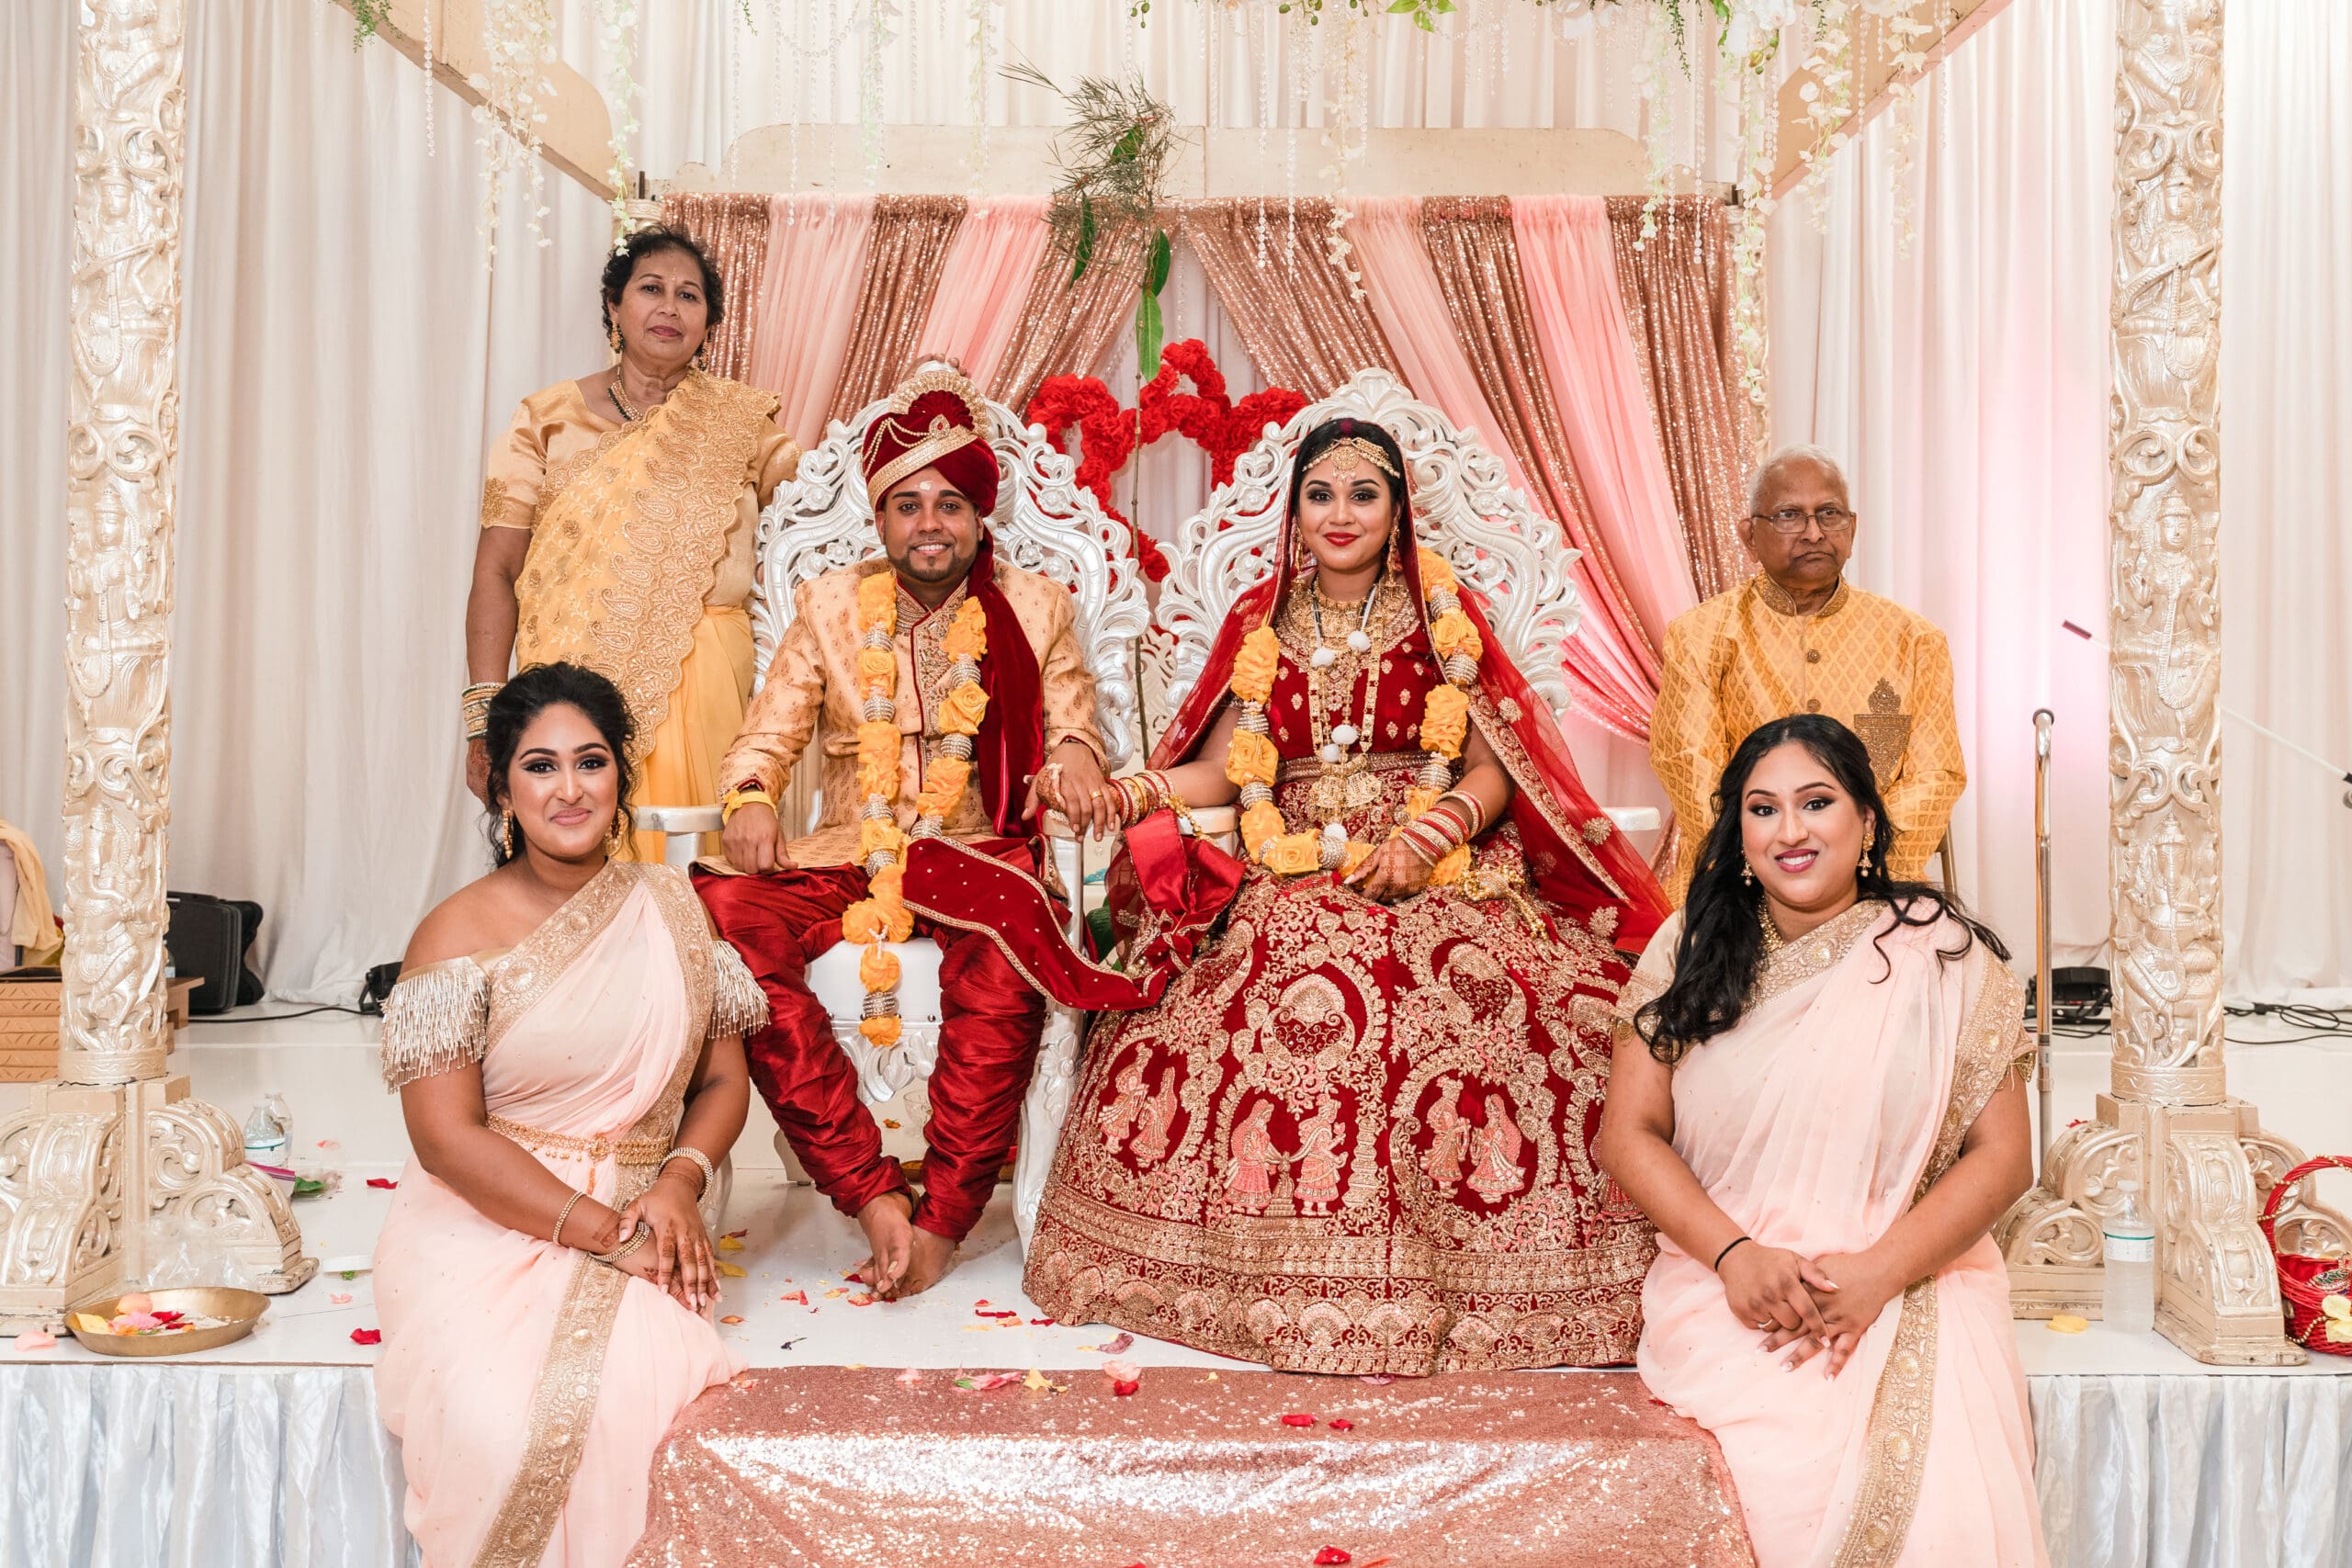 Bride, groom, bride's parents, and two sisters seated together, all dressed in traditional Indian wedding attire, smiling in cultural wedding portrait.